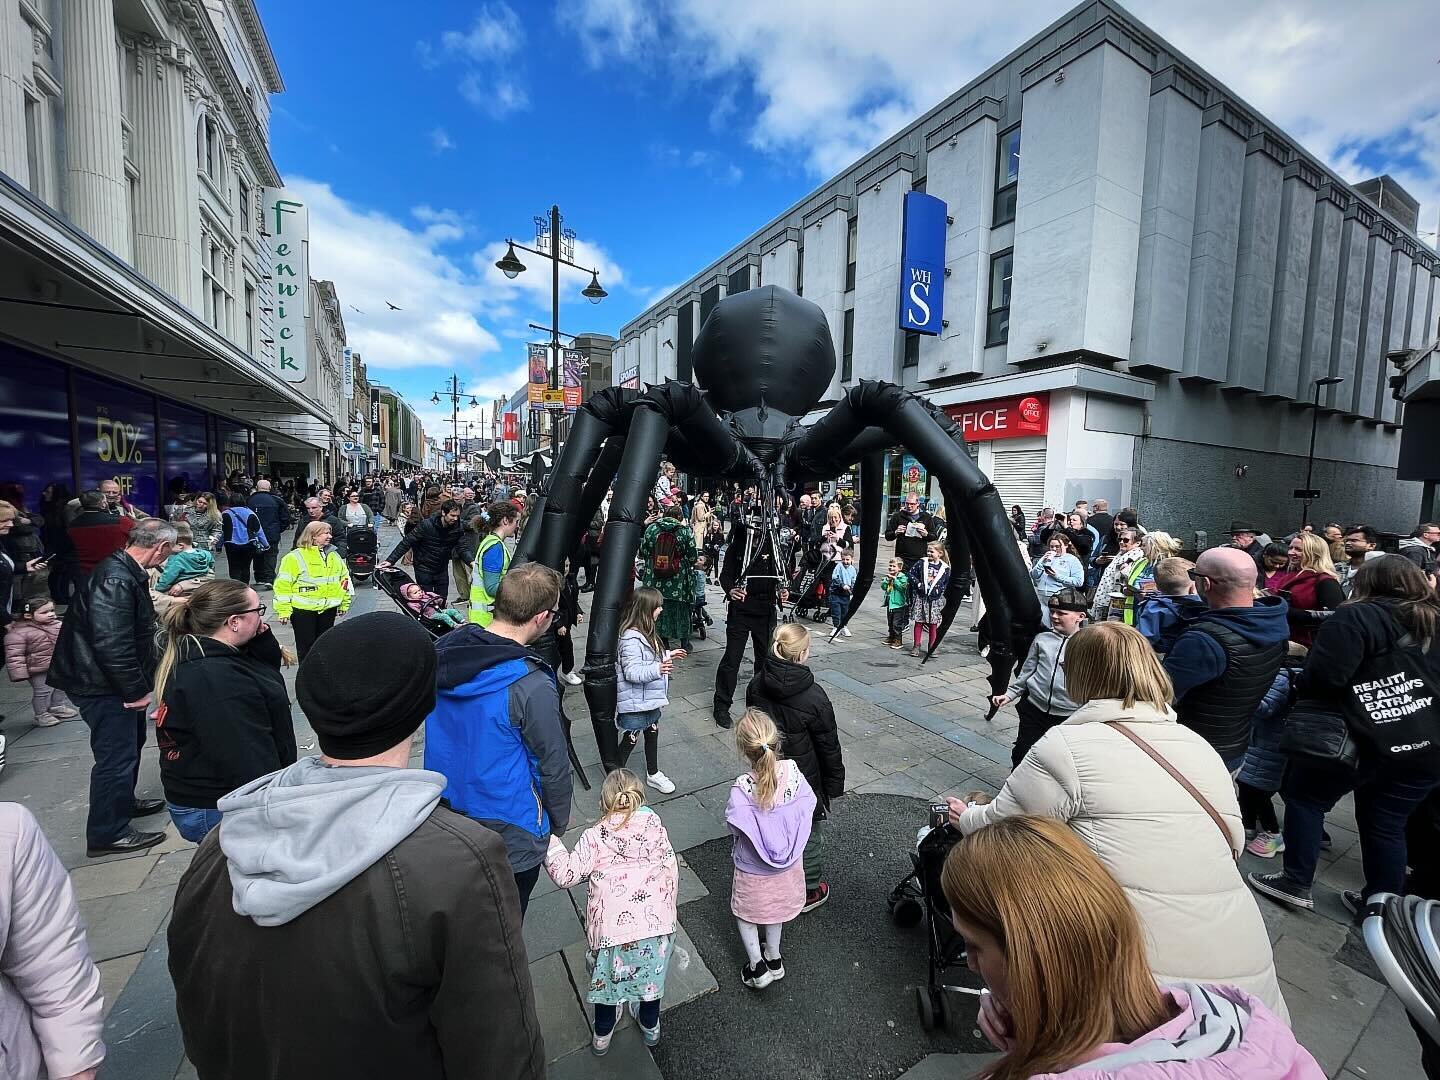 Big crowds in #newcastle today for our shows at #newcastlepuppetfestival @nathanunthank at the controls. @movingpartsarts 

#worldpuppetryday #giantpuppets #arachnobot #giantspider #inflatableart #arachnophobe #arachnid #walkaboutshow #puppetry #outd